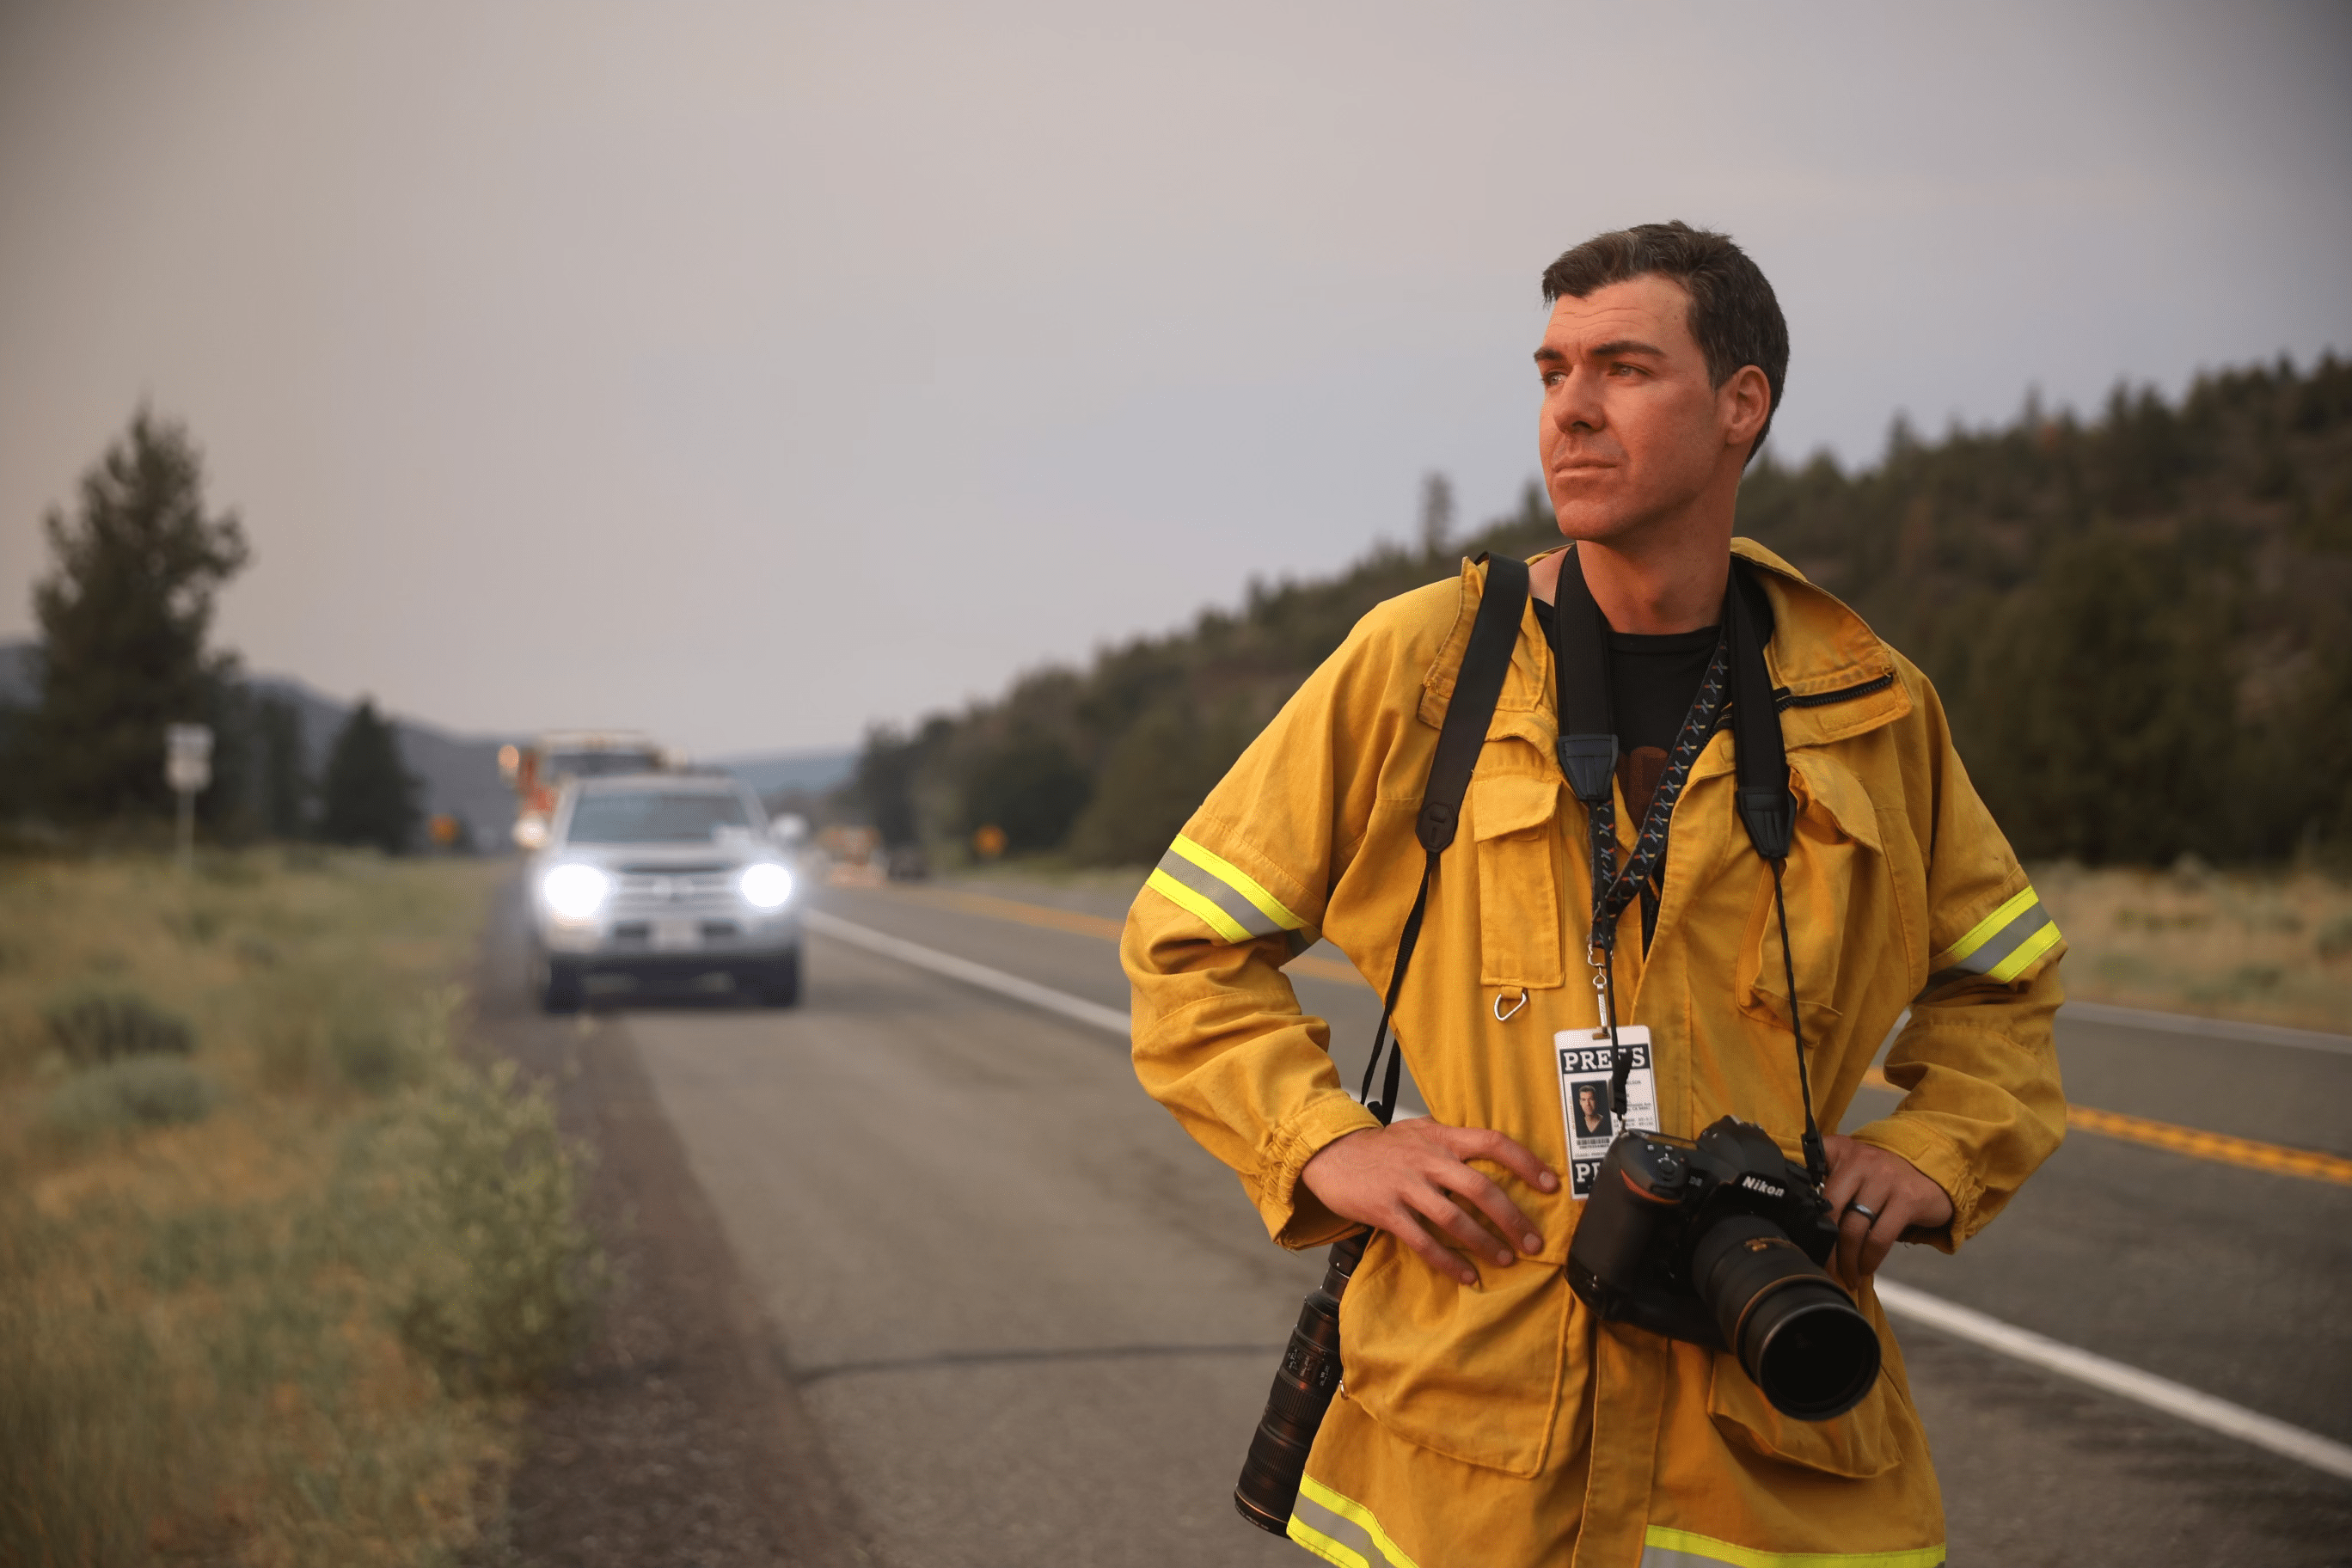 Photographer Josh Edelson surveys the landscape while standing in the road with a camera and press badge around his neck.